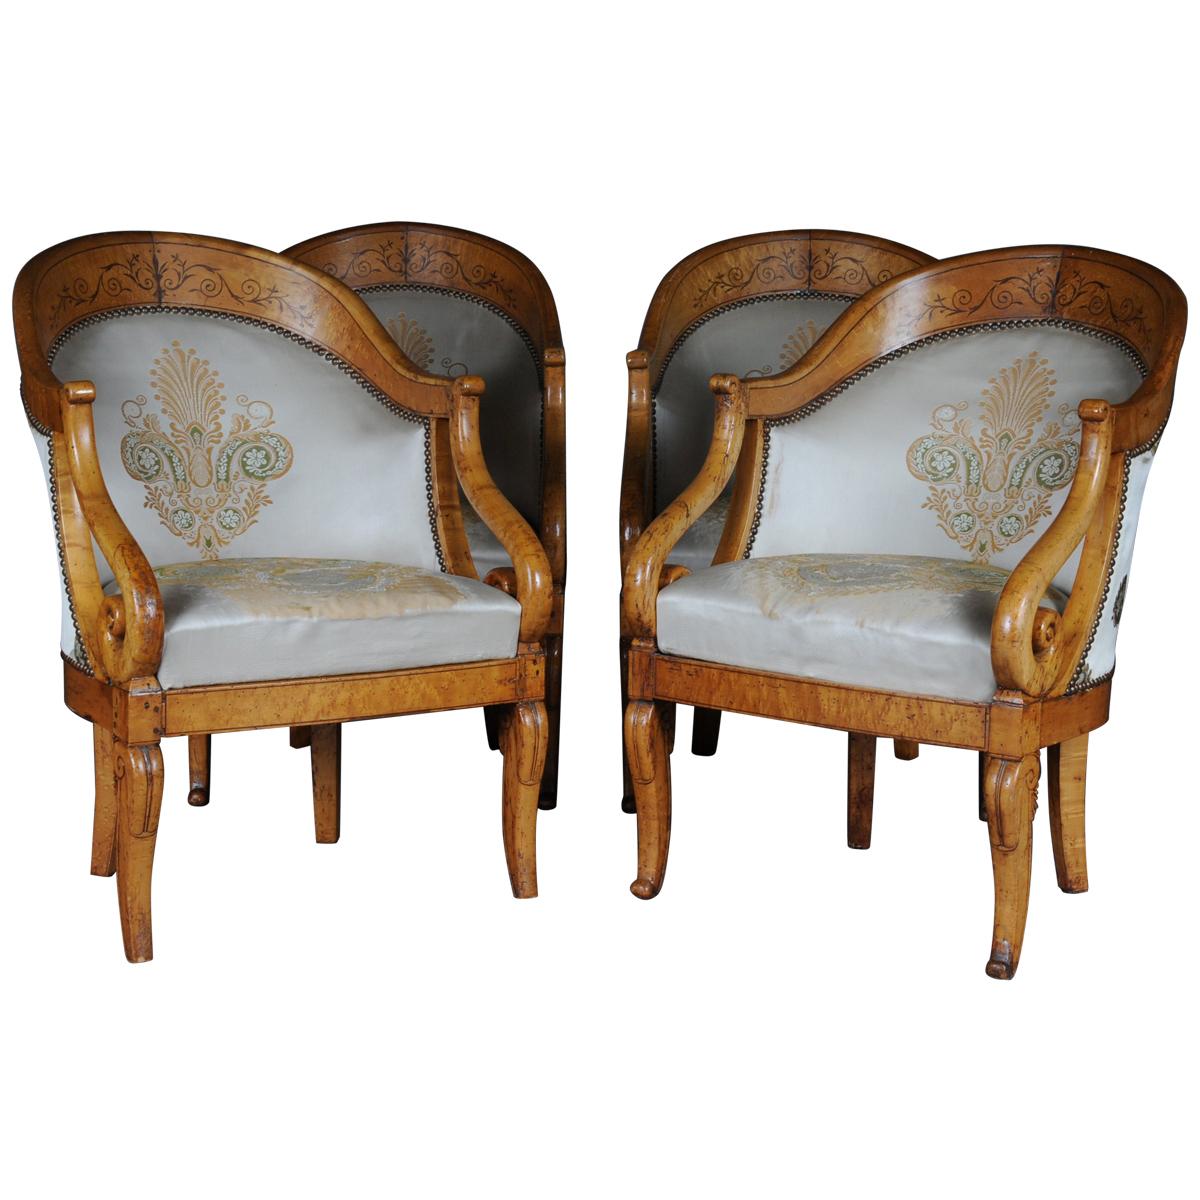 Set of Empire Armchairs / Chairs, Maple Wood, Paris, 1825